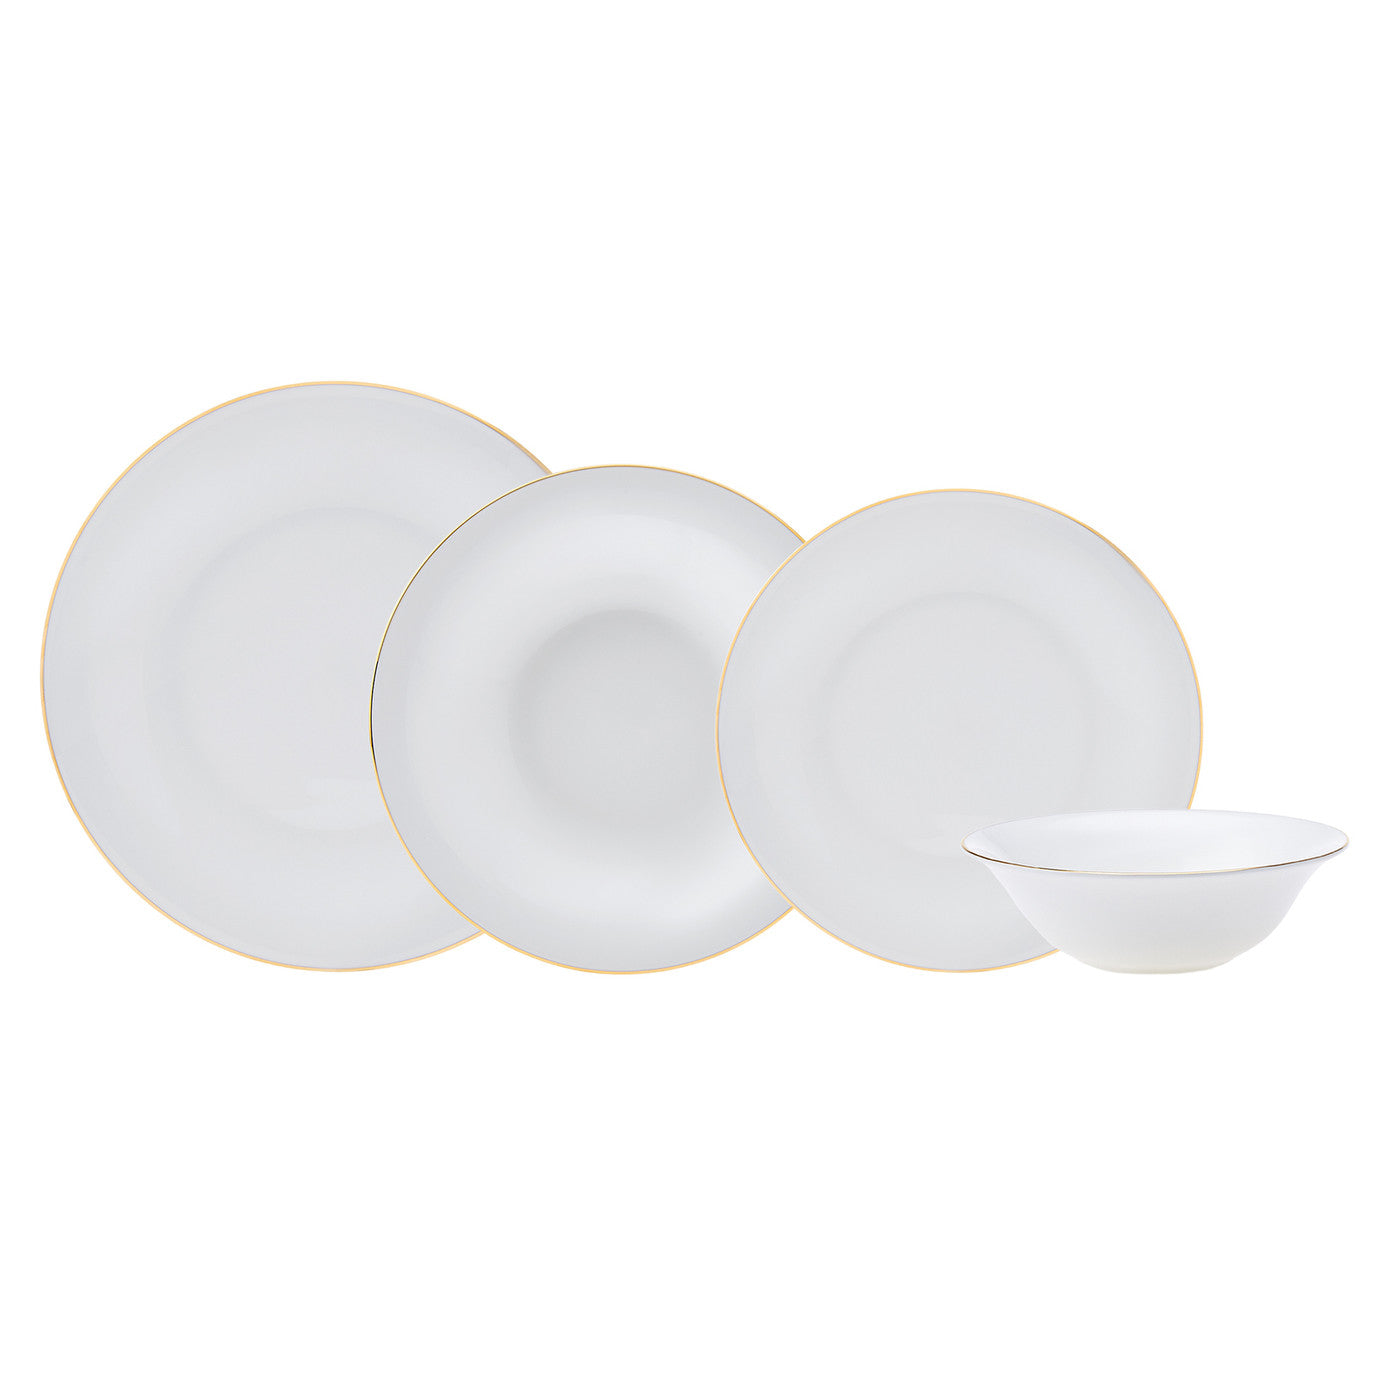 Fine Pearl Dinner Sets for 6 People